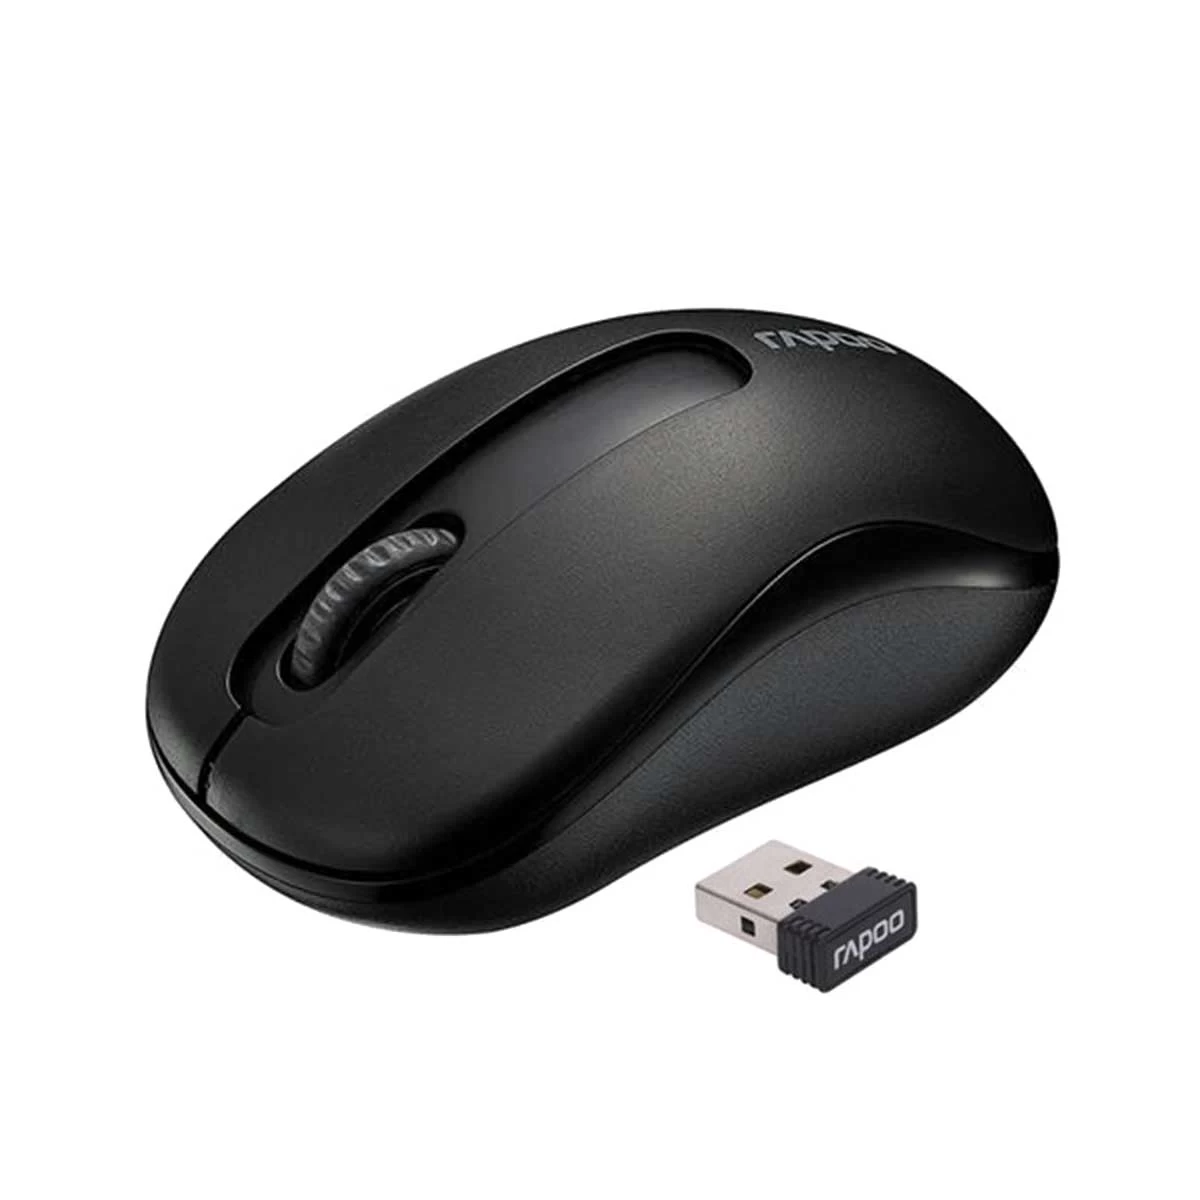 Rapoo M10 Plus Wireless Mouse Price in BD, Black | RAYNS